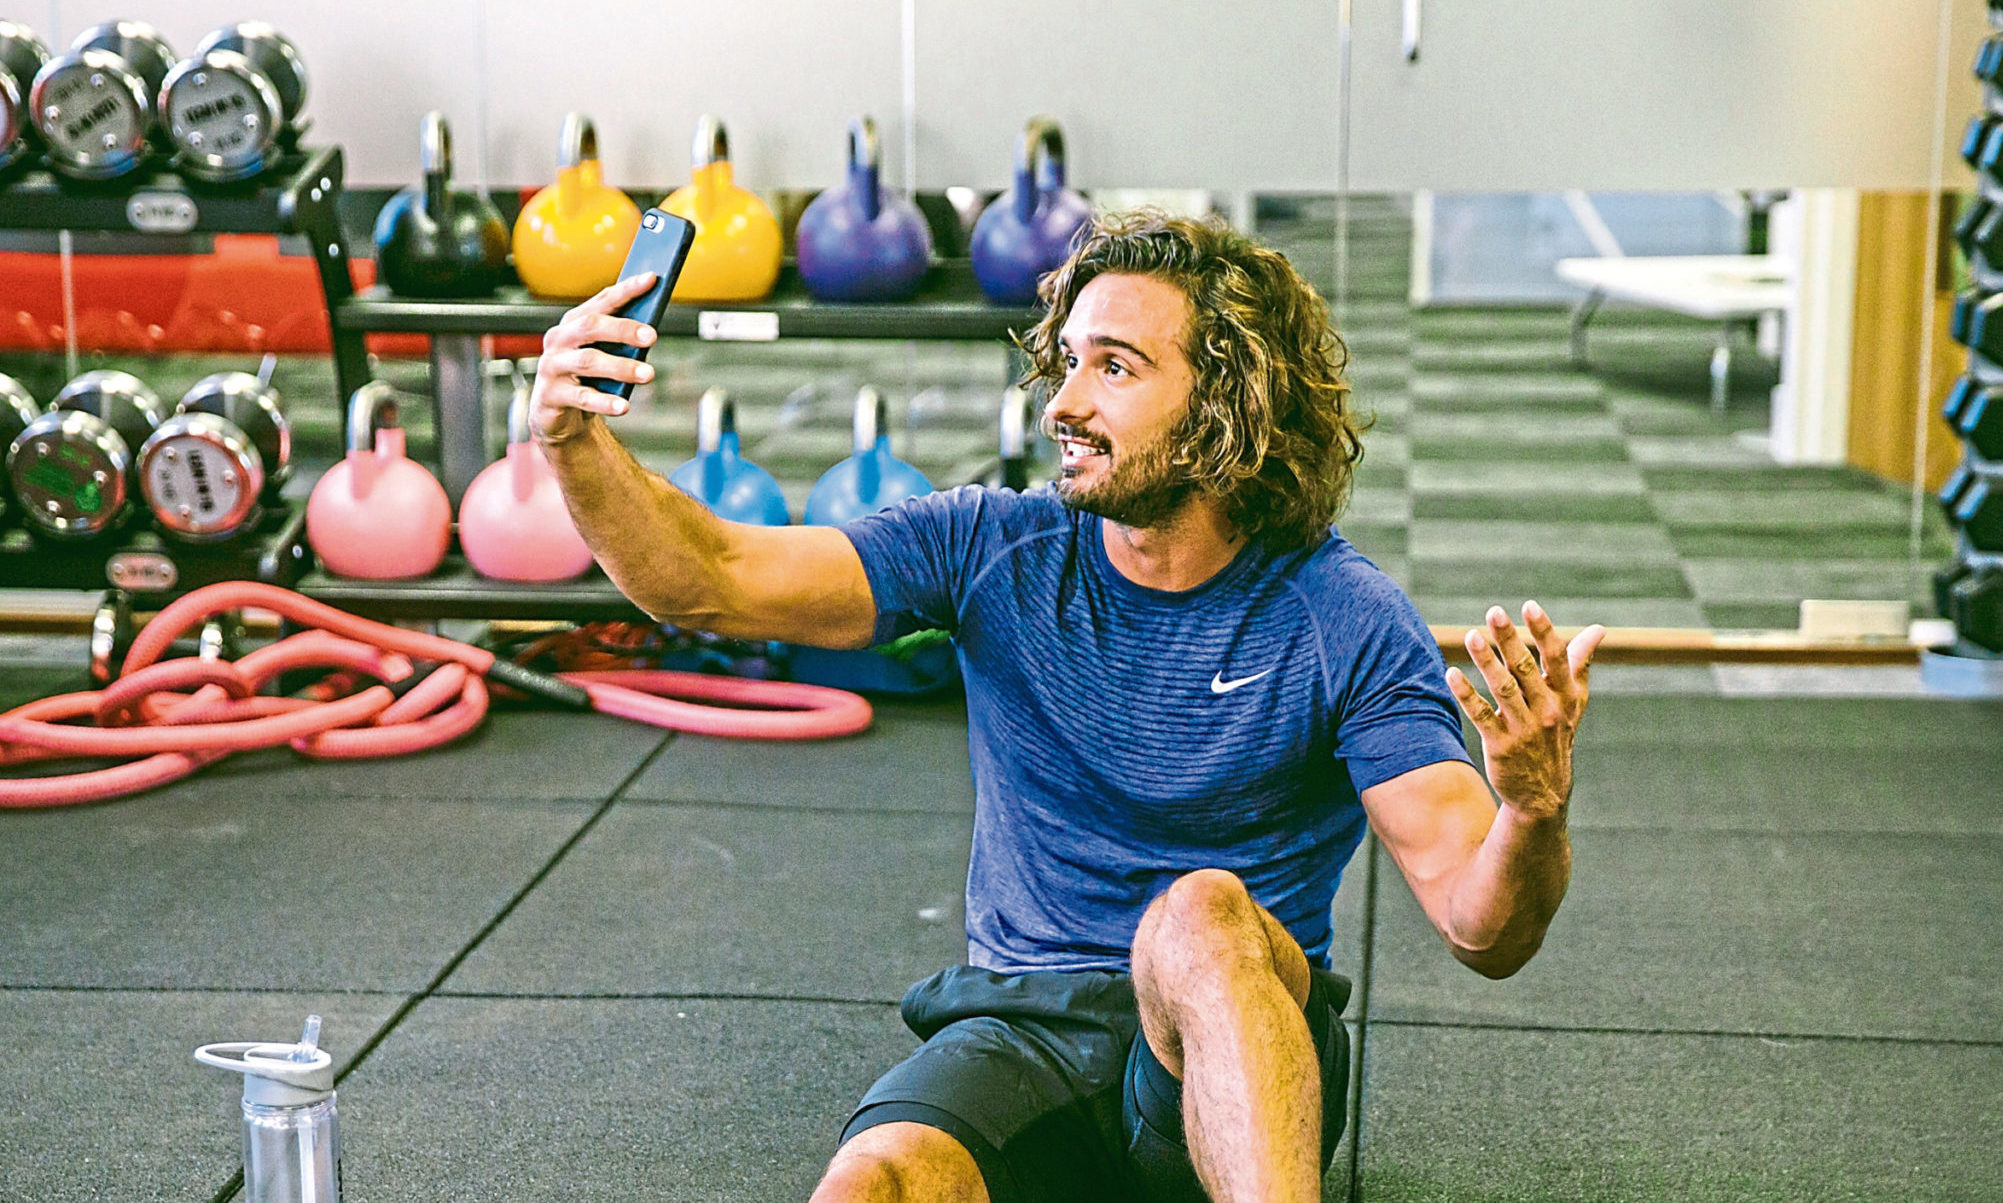 Joe Wicks has been performing a daily exercise video online during the coronavirus lockdown.